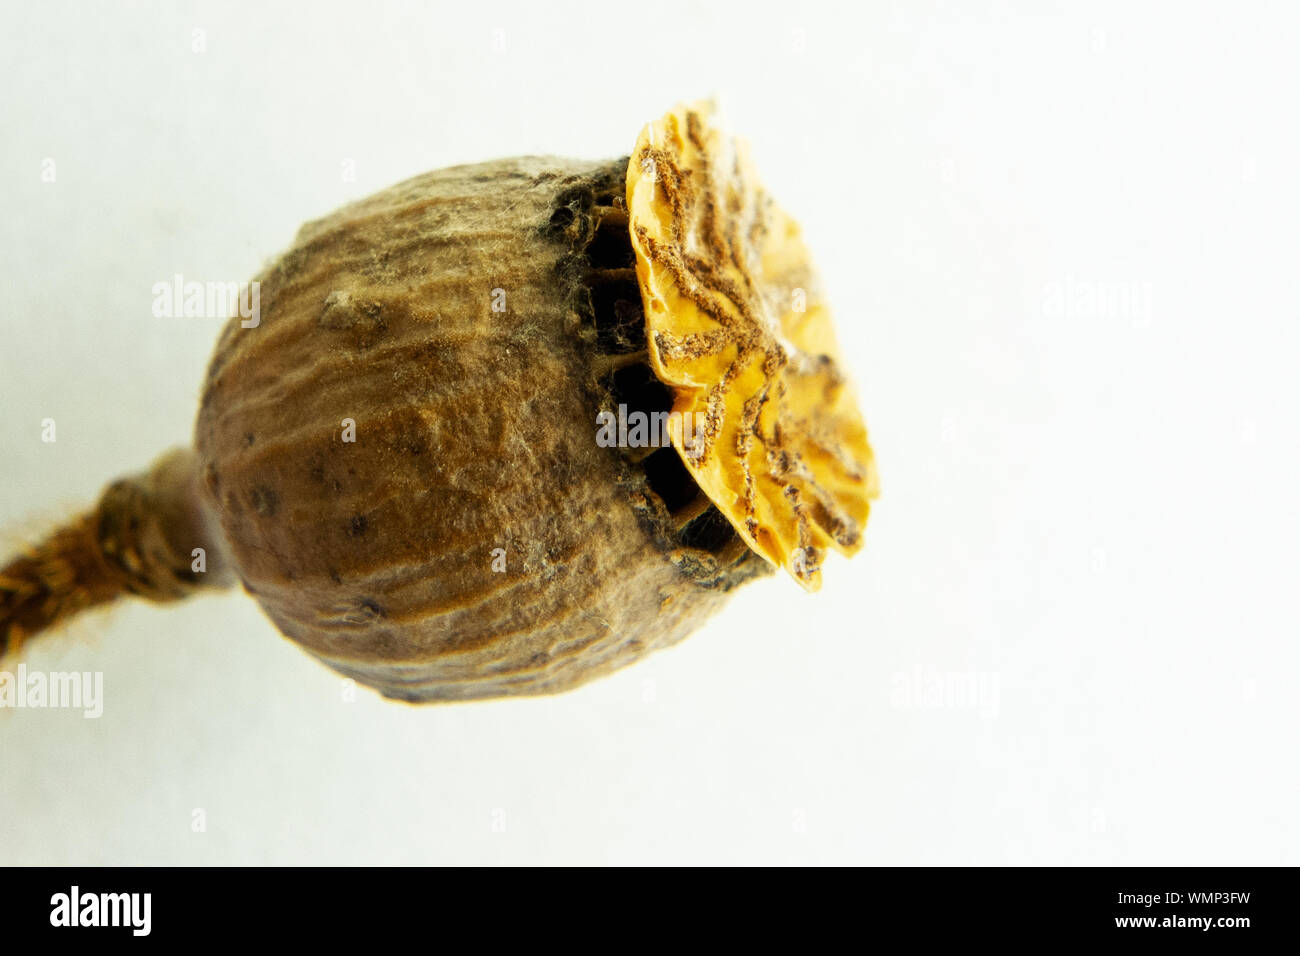 Poppy pod head macro on white background. Drugs raw material for opium addicted. Autumn harvest of seeds for bakery. Concept of narcotics issues Stock Photo